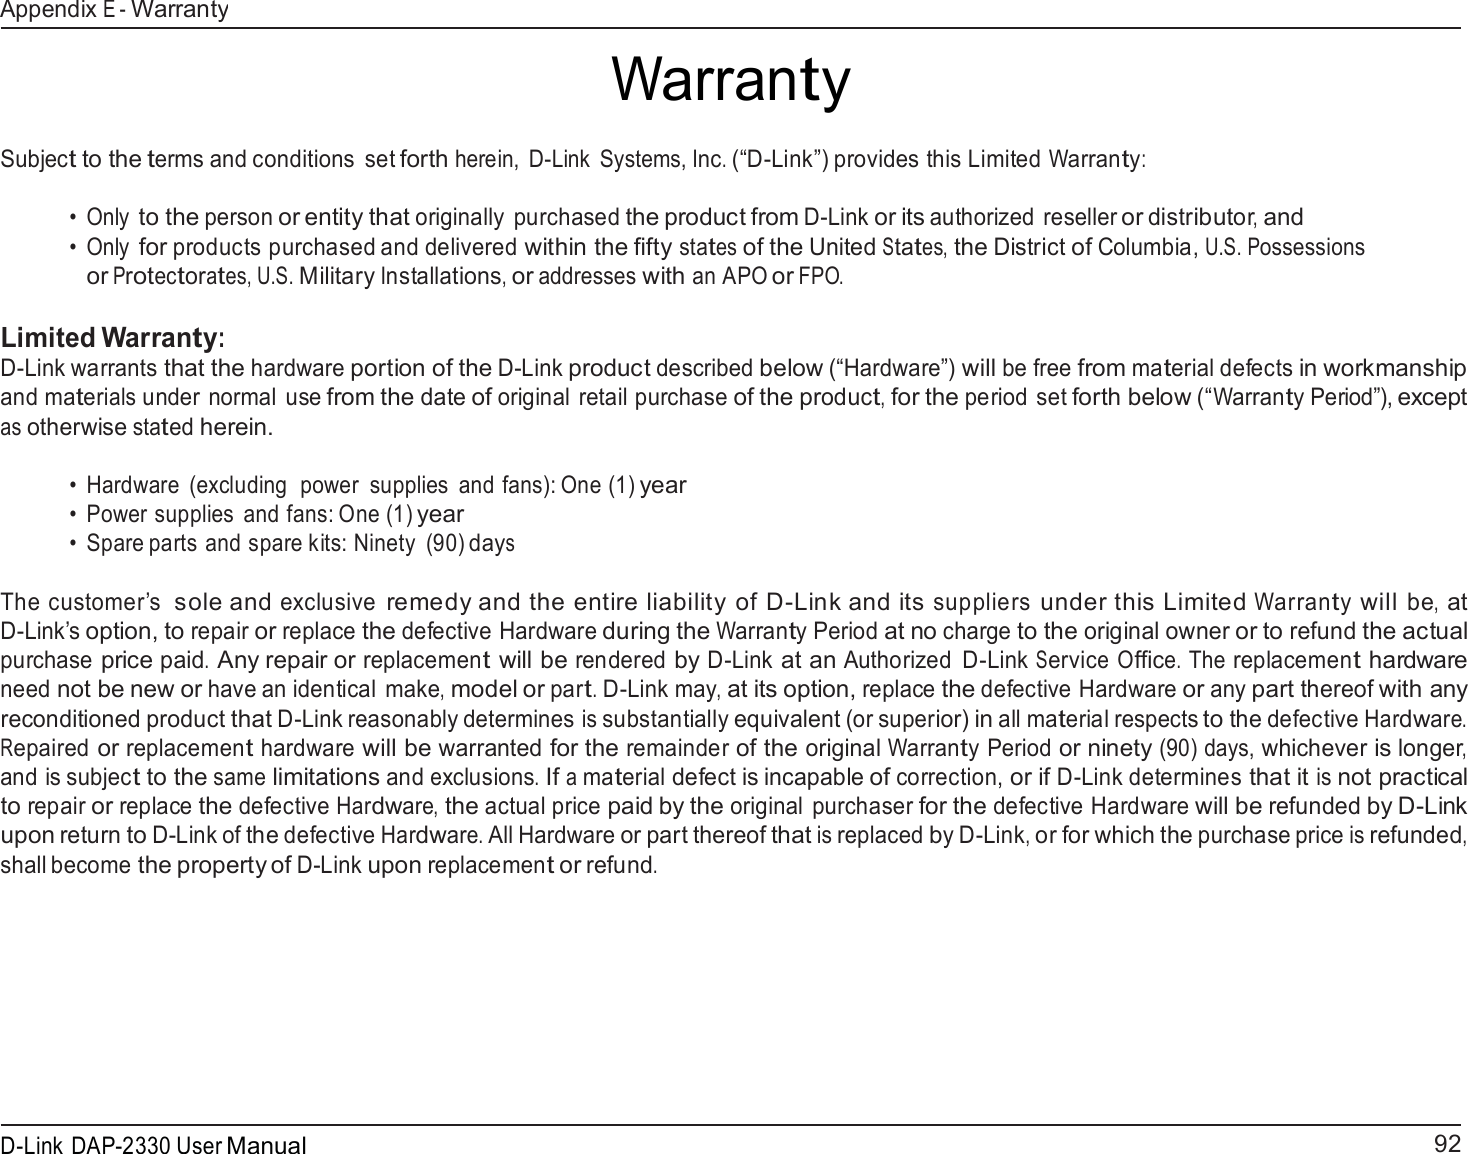 92 D-Link DAP-2330 User ManualAppendix E - Warranty   Warranty   Subject to the terms and conditions set forth herein,  D-Link  Systems, Inc. (“D-Link”) provides this Limited Warranty:   •  Only to the person or entity that originally purchased the product from D-Link or its authorized reseller or distributor, and •  Only for products purchased and delivered within the fifty states of the United States, the District of Columbia, U.S. Possessions or Protectorates, U.S. Military Installations, or addresses with an APO or FPO.  Limited Warranty: D-Link warrants that the hardware portion of the D-Link product described below (“Hardware”) will be free from material defects in workmanship and materials under normal use from the date of original retail purchase of the product, for the period set forth below (“Warranty Period”), except as otherwise stated herein.  •  Hardware  (excluding  power  supplies  and fans): One (1) year •  Power supplies  and fans: One (1) year •  Spare parts and spare kits: Ninety  (90) days   The customer’s  sole and exclusive remedy and the entire liability of D-Link and its suppliers under this Limited Warranty will be, at D-Link’s option, to repair or replace the defective Hardware during the Warranty Period at no charge to the original owner or to refund the actual purchase price paid. Any repair or replacement will be rendered by D-Link at an Authorized  D-Link Service Office. The replacement hardware need not be new or have an identical  make, model or part. D-Link may, at its option, replace the defective Hardware or any part thereof with any reconditioned product that D-Link reasonably determines is substantially equivalent (or superior) in all material respects to the defective Hardware. Repaired or replacement hardware will be warranted for the remainder of the original Warranty Period or ninety (90) days, whichever is longer, and is subject to the same limitations and exclusions. If a material defect is incapable of correction, or if D-Link determines that it is not practical to repair or replace the defective Hardware, the actual price paid by the original purchaser for the defective Hardware will be refunded by D-Link upon return to D-Link of the defective Hardware. All Hardware or part thereof that is replaced by D-Link, or for which the purchase price is refunded, shall become the property of D-Link upon replacement or refund. 